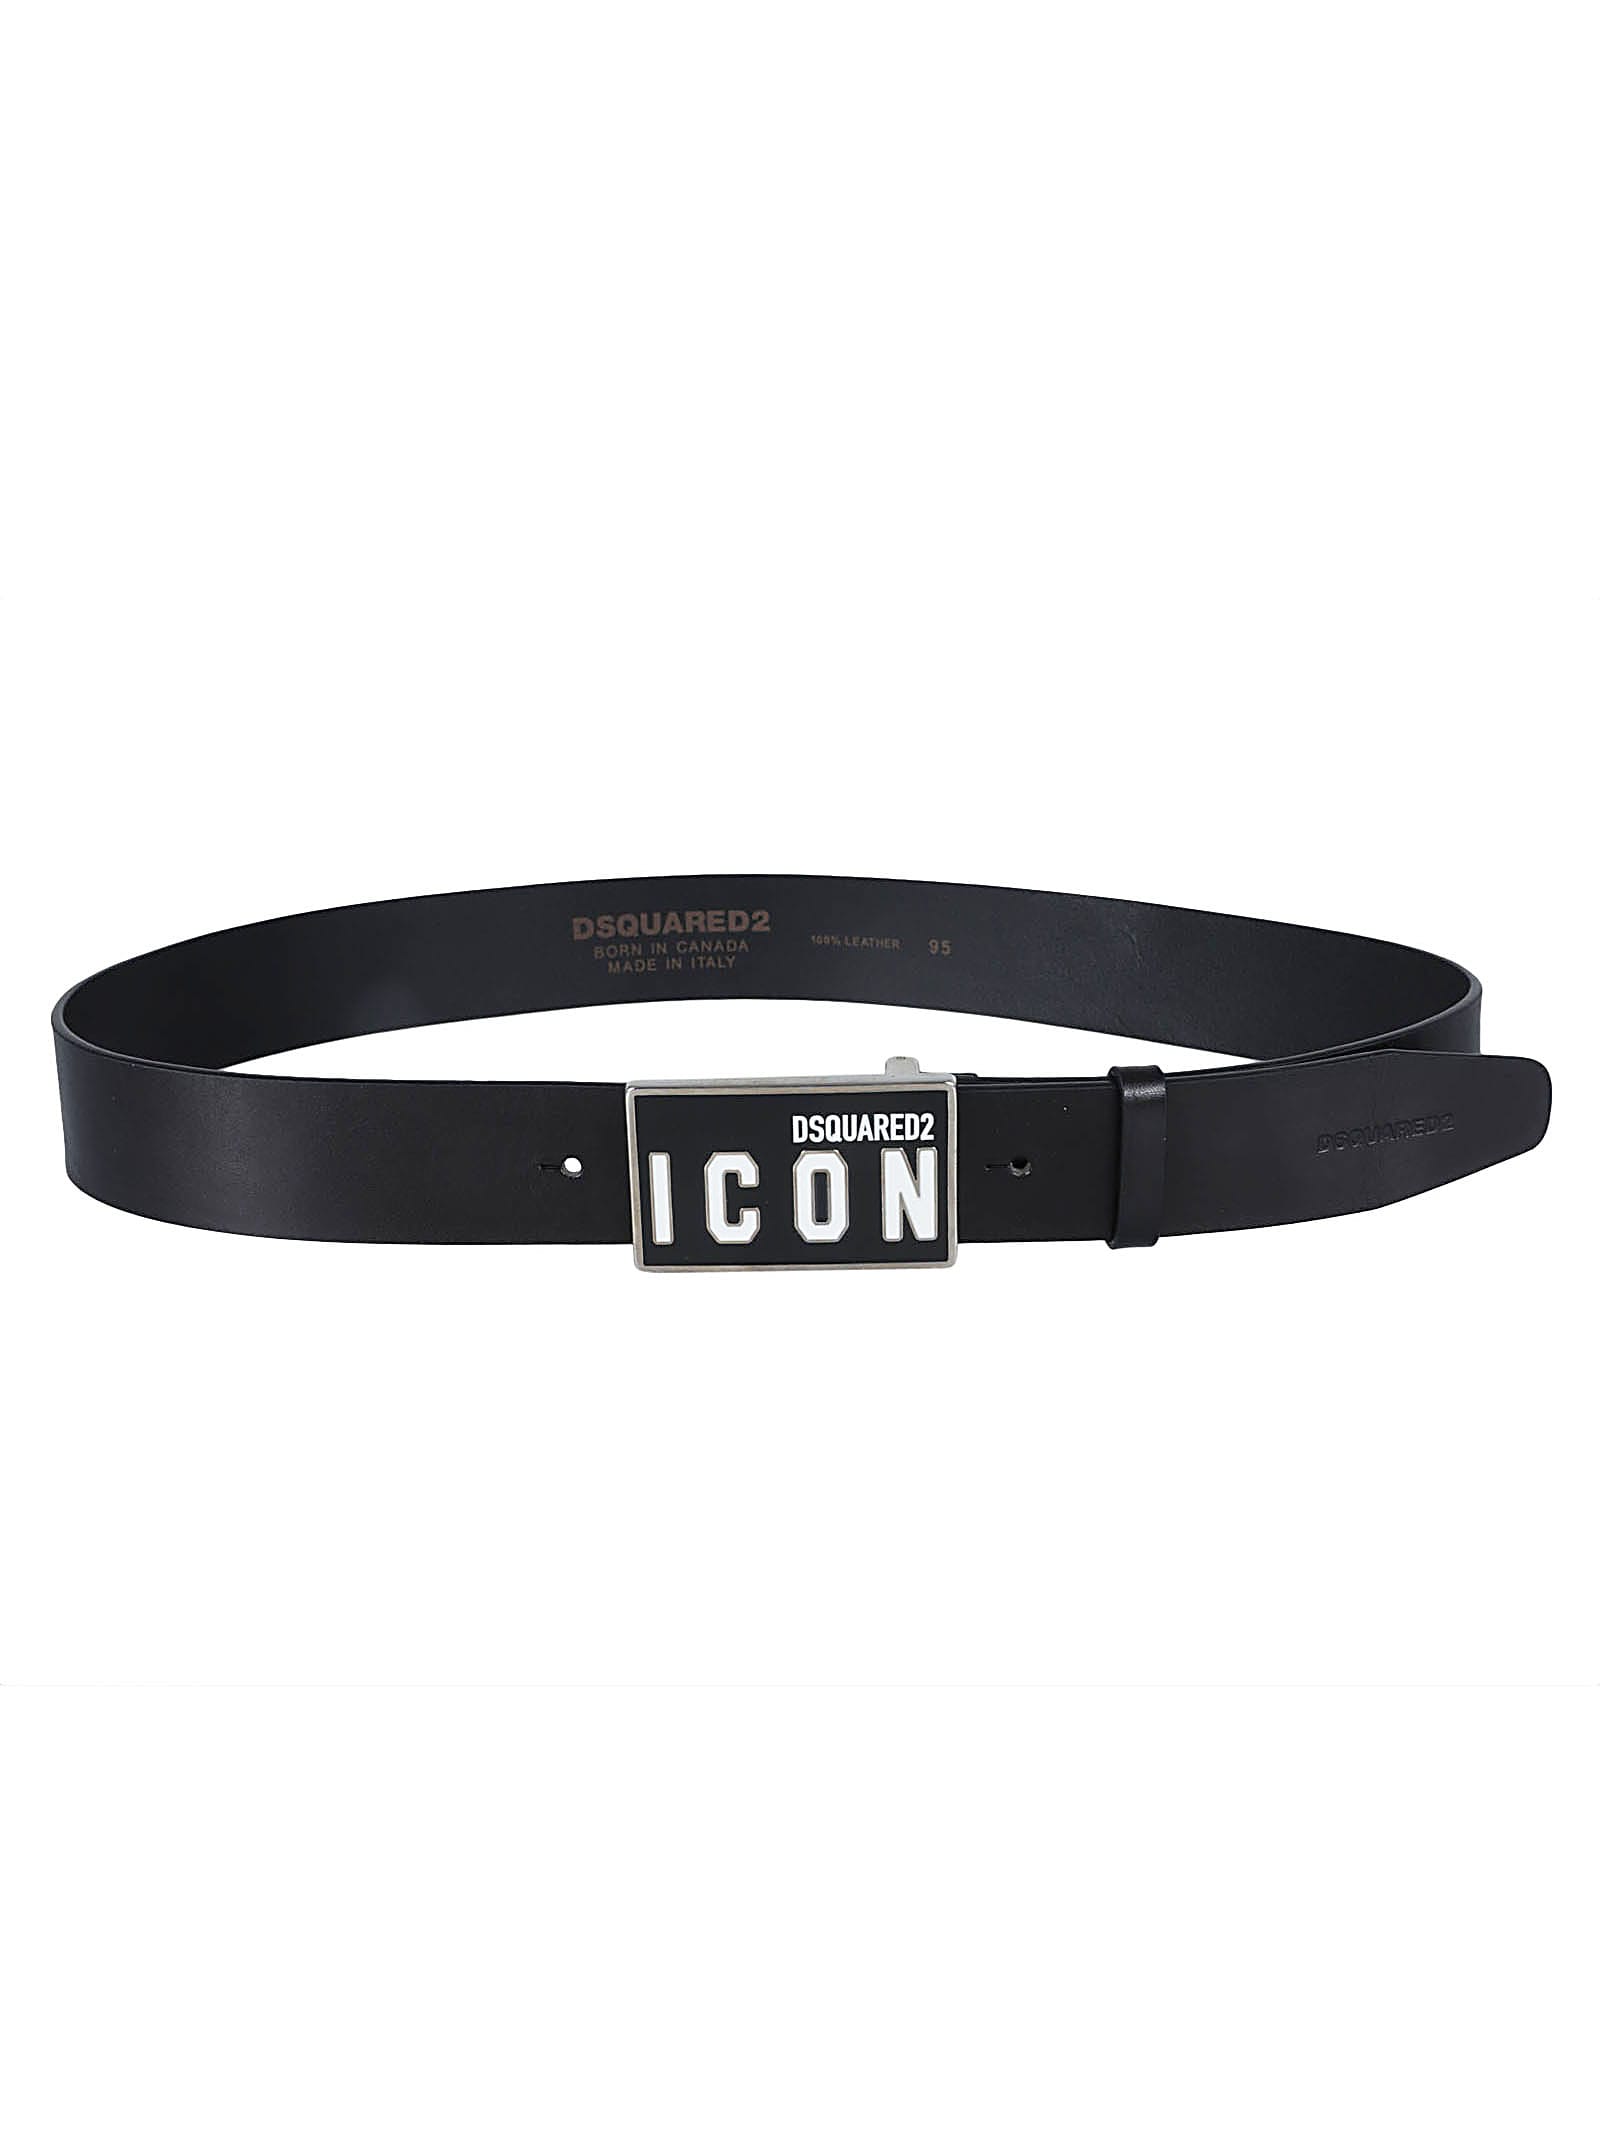 DSQUARED2 ICON BUCKLED BELT